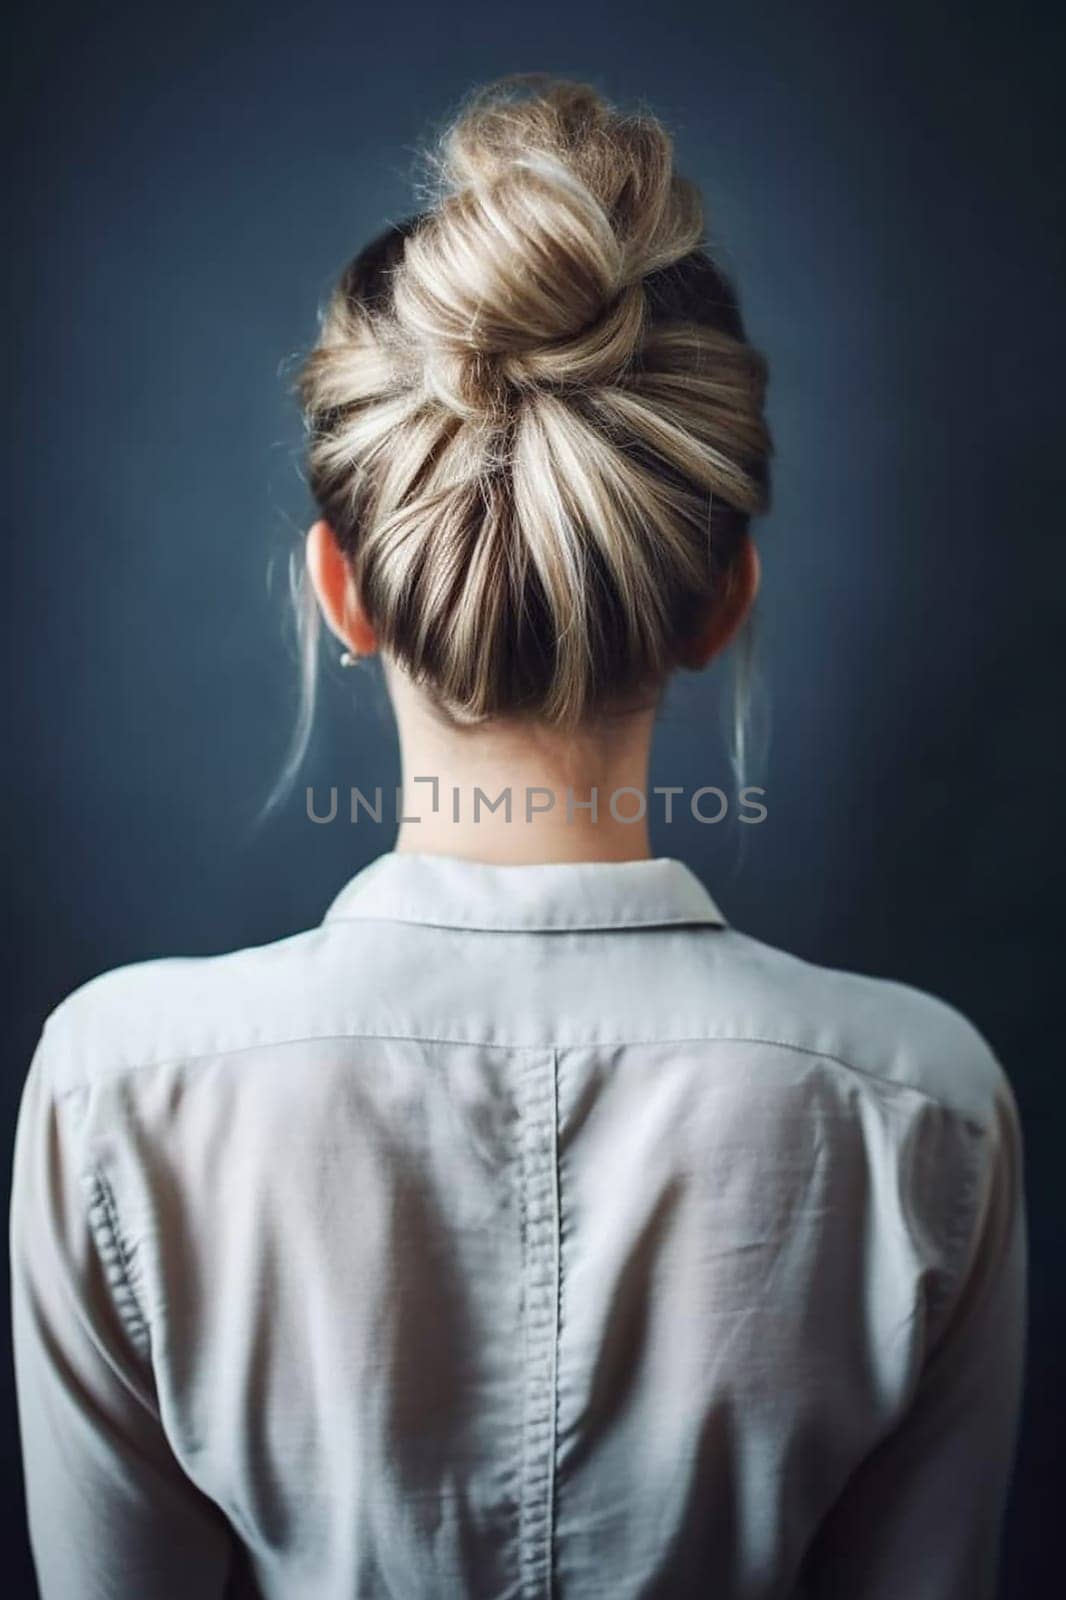 Elegant hairstyle with a neatly done bun on a person with light-toned hair